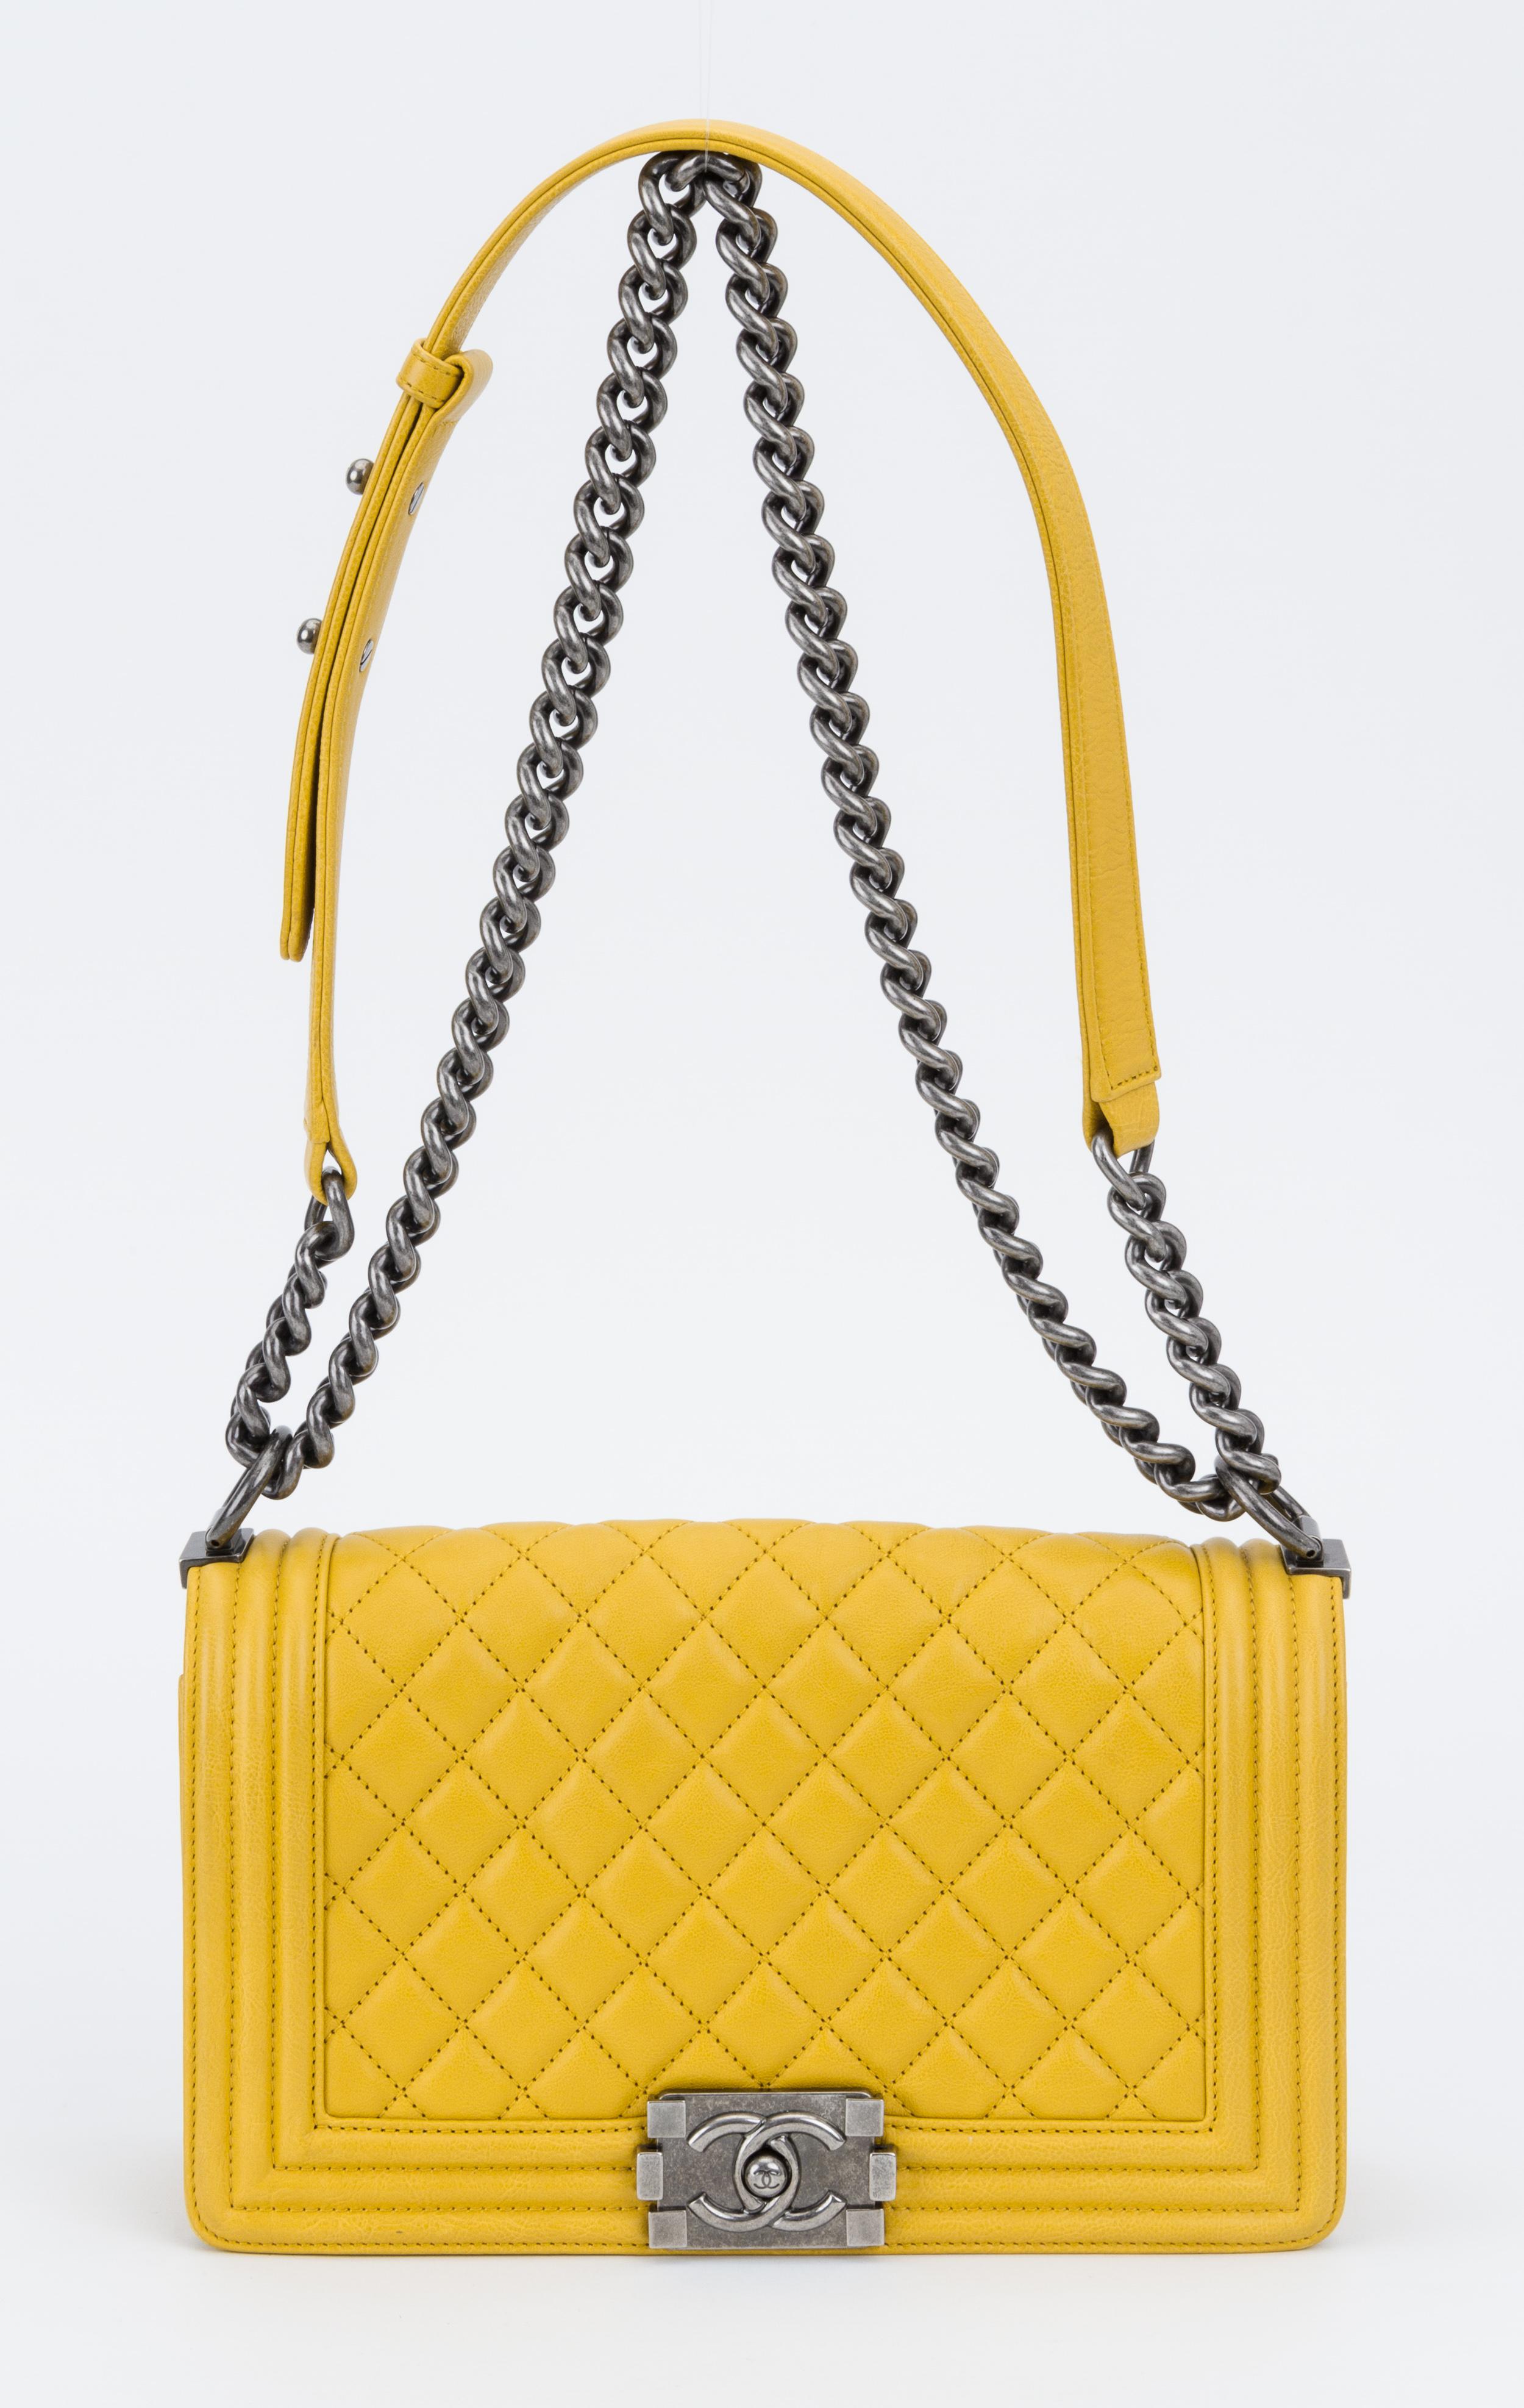 Chanel medium boy bag in yellow leather with ruthenium hardware. Shoulder drop, 11